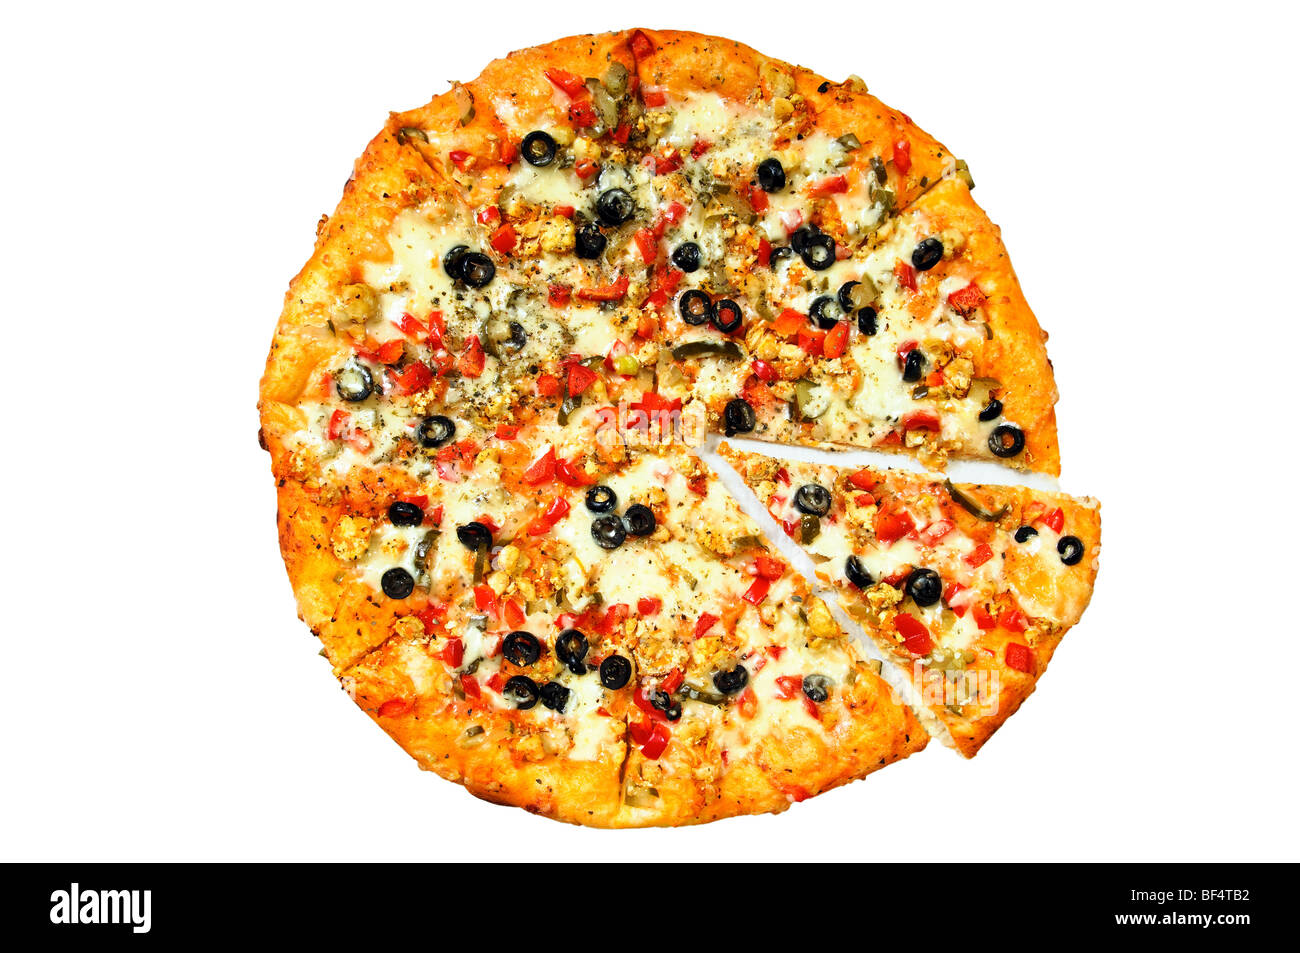 Top view of a tasty pizza Stock Photo